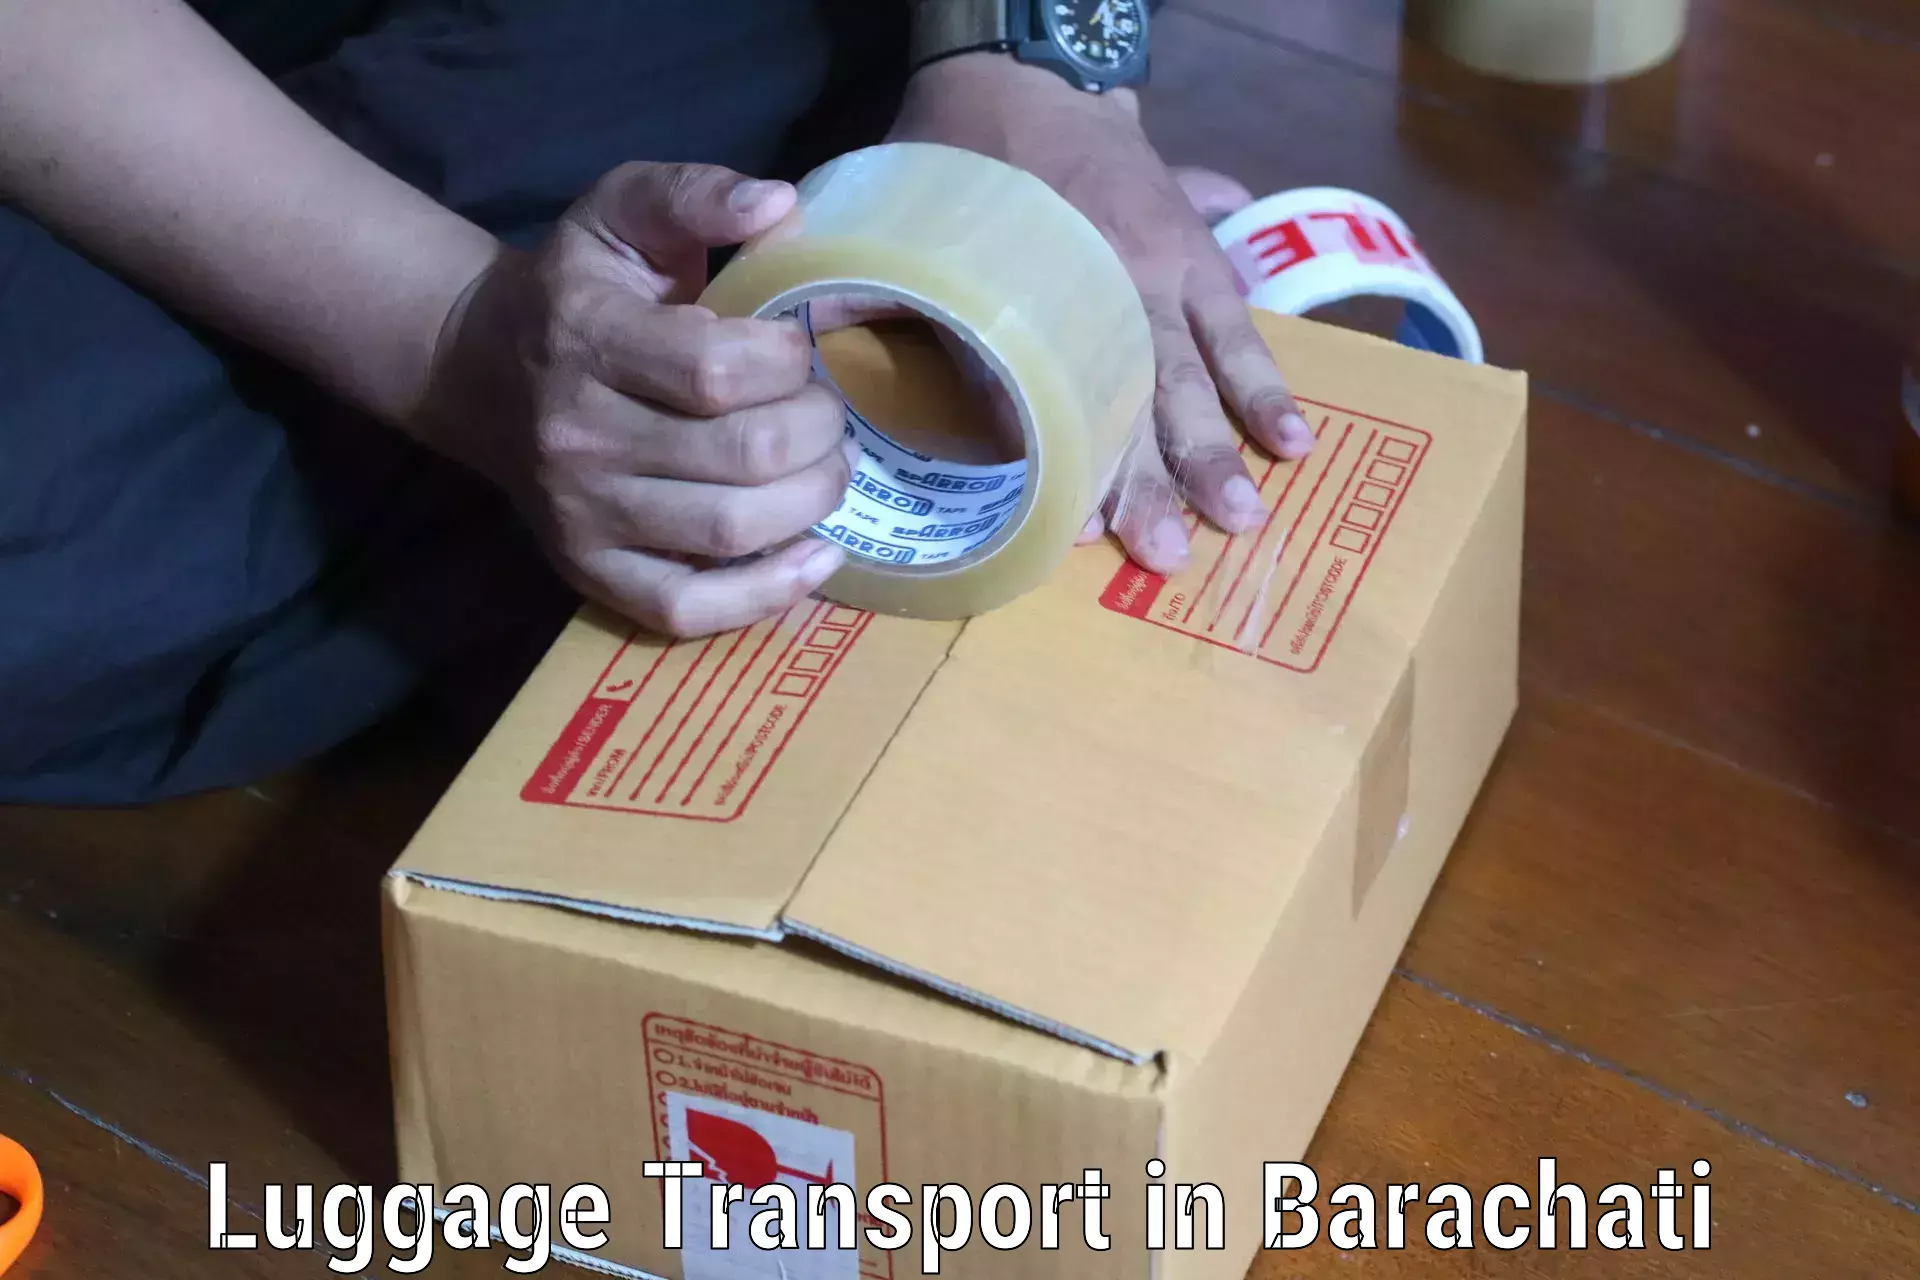 Luggage storage and delivery in Barachati